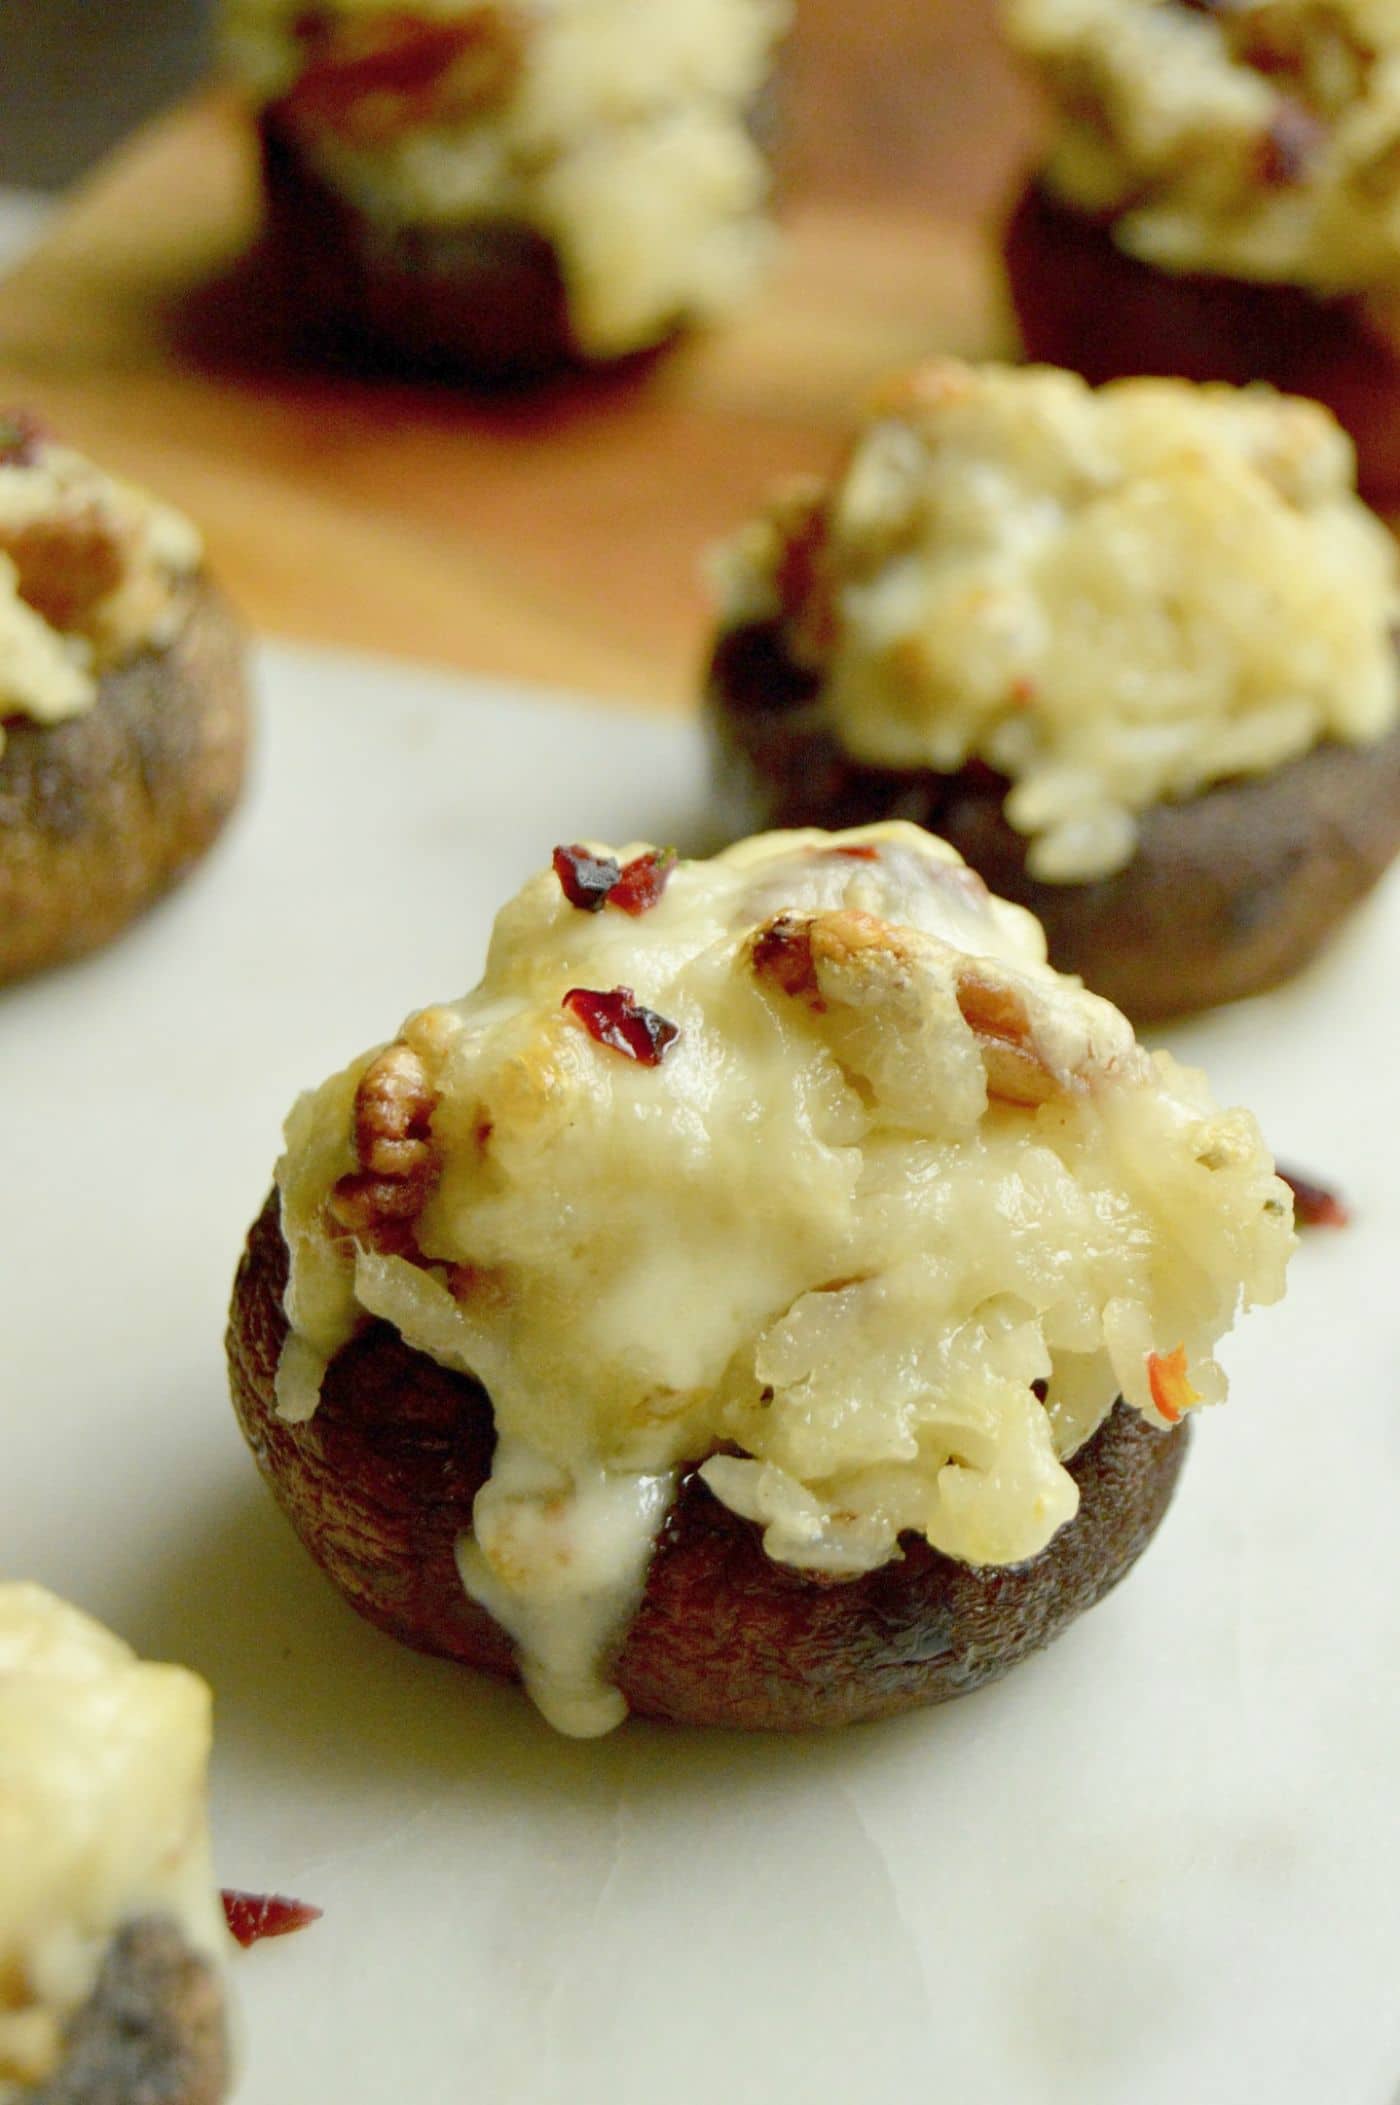 Melted cheese stirred into rice with pecans, cranberries all stuffed into tender, fresh mushrooms an appetizer your guests at any holiday party, football viewing or just for a Friday Night snack.